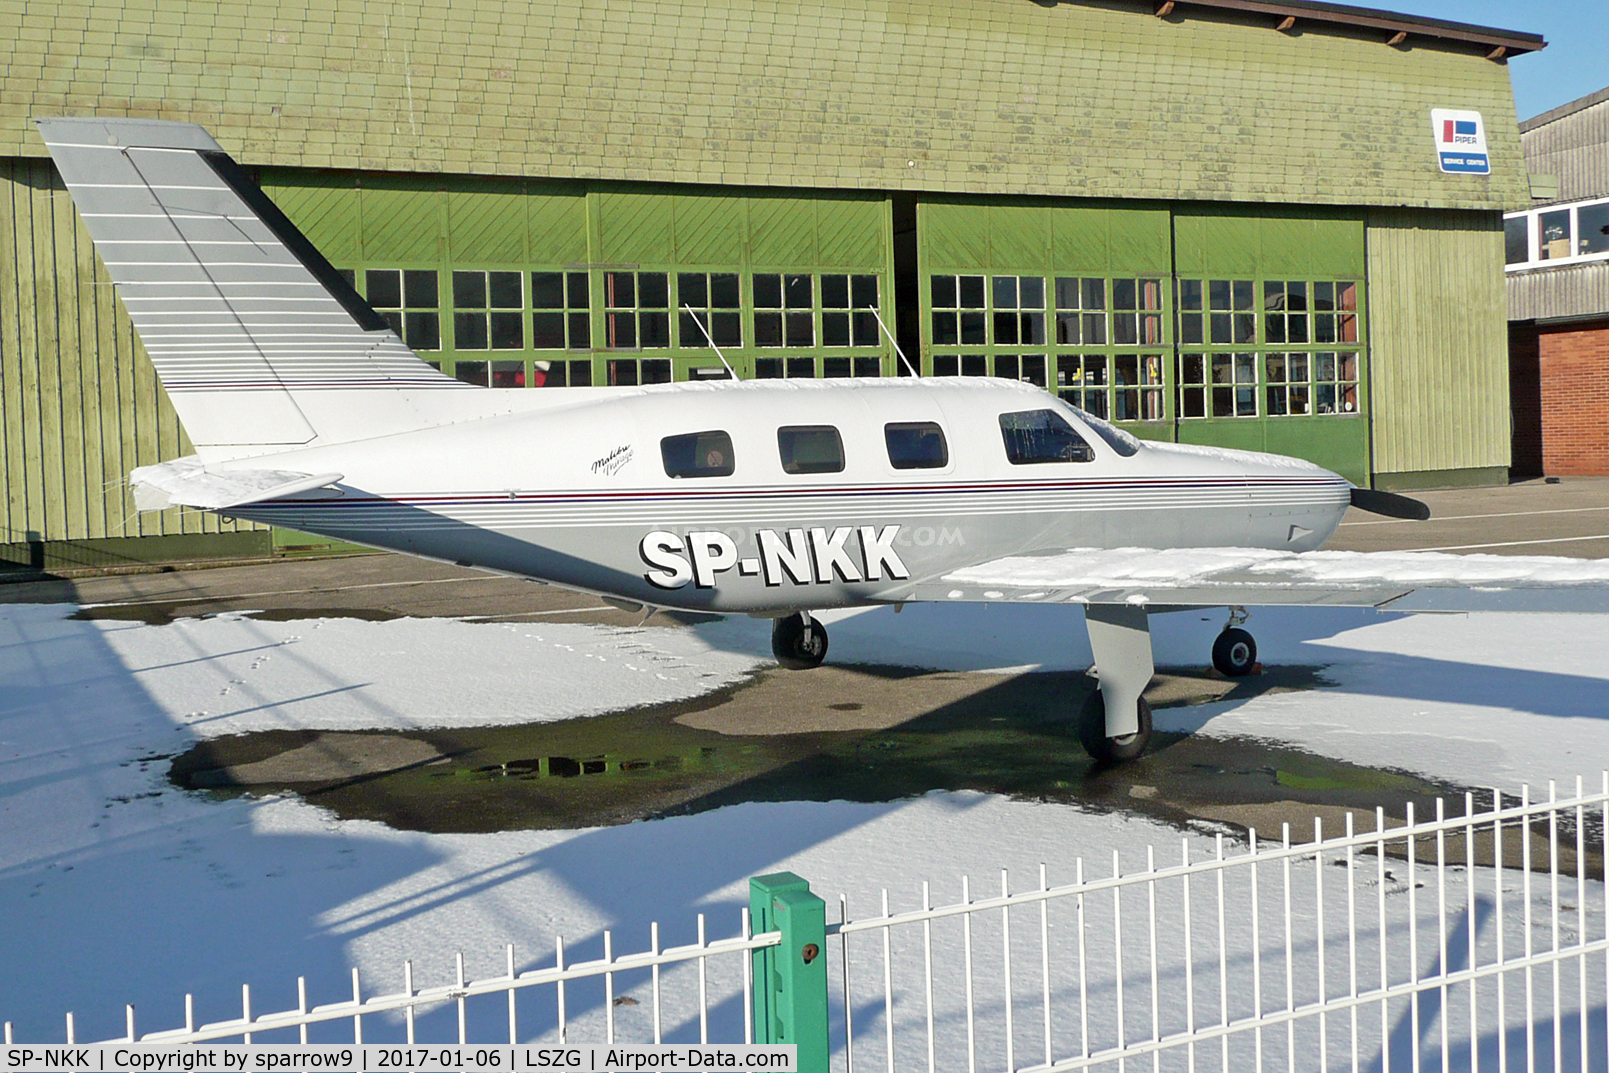 SP-NKK, 1989 Piper PA-46-350P Malibu Mirage C/N 4622051, It was only a short time on the Polish register.